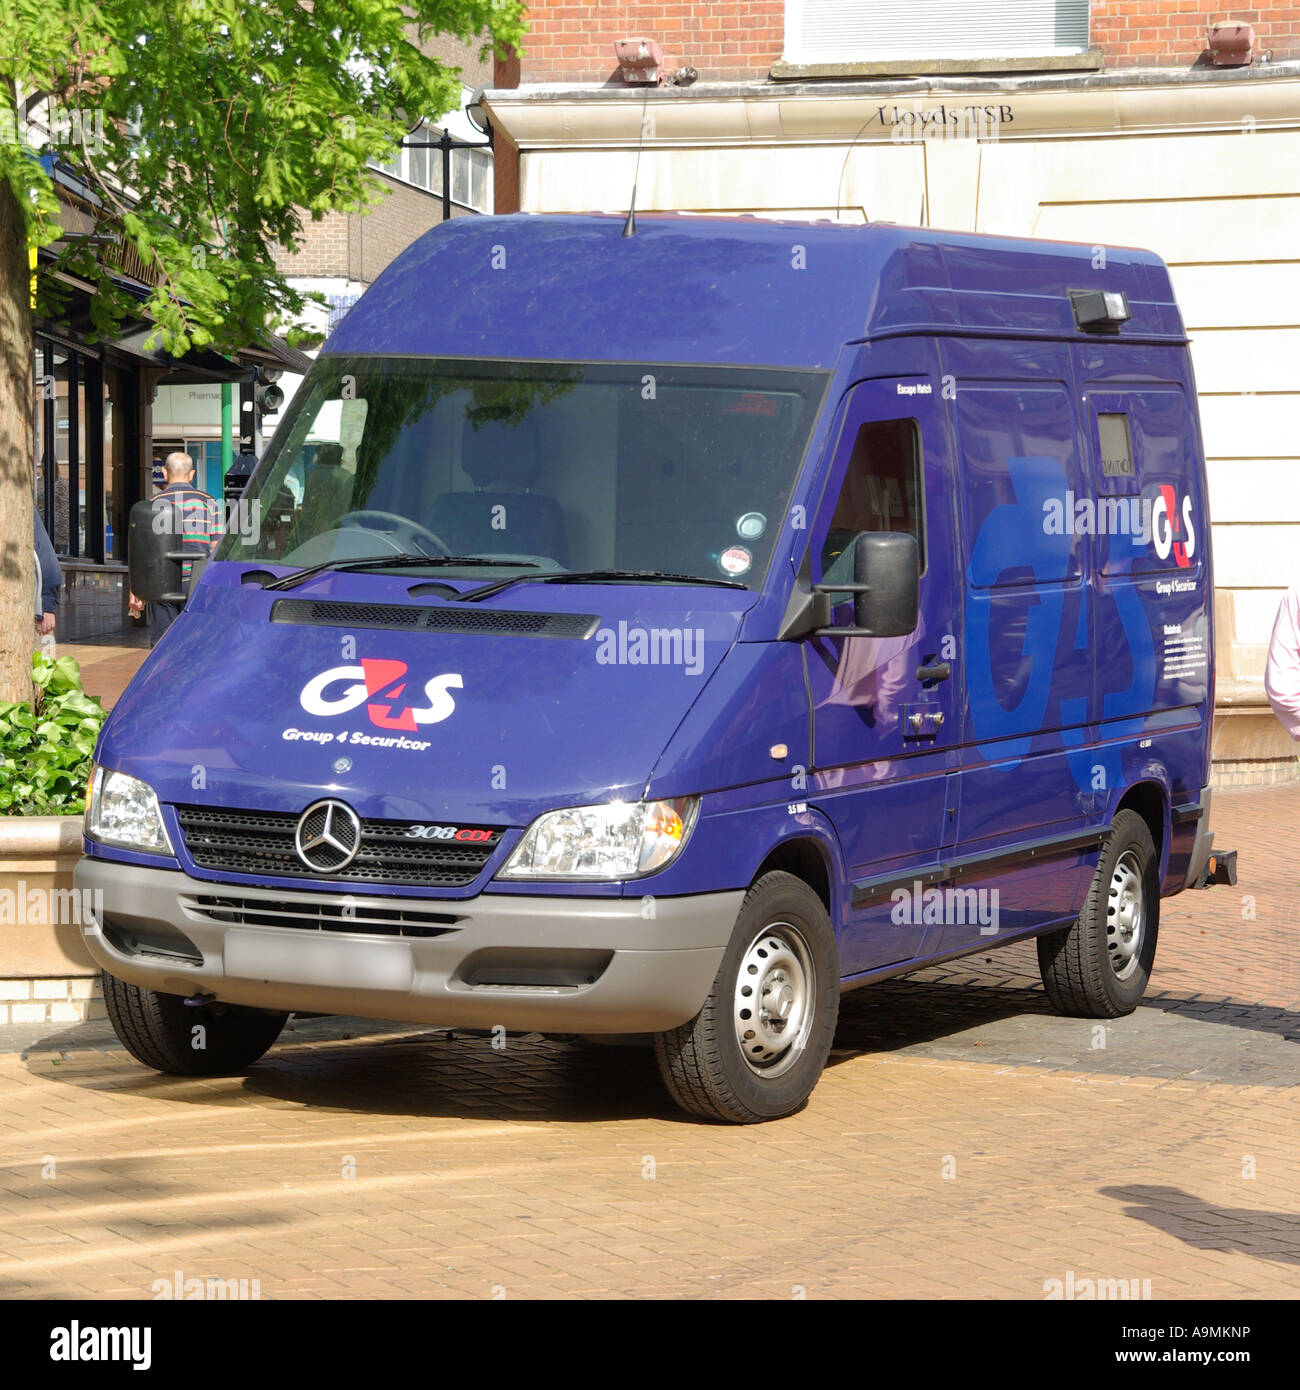 G4S business blue money delivery tracked high security van transport parked  in pedestrian shopping high street near bank Chelmsford Essex England UK  Stock Photo - Alamy